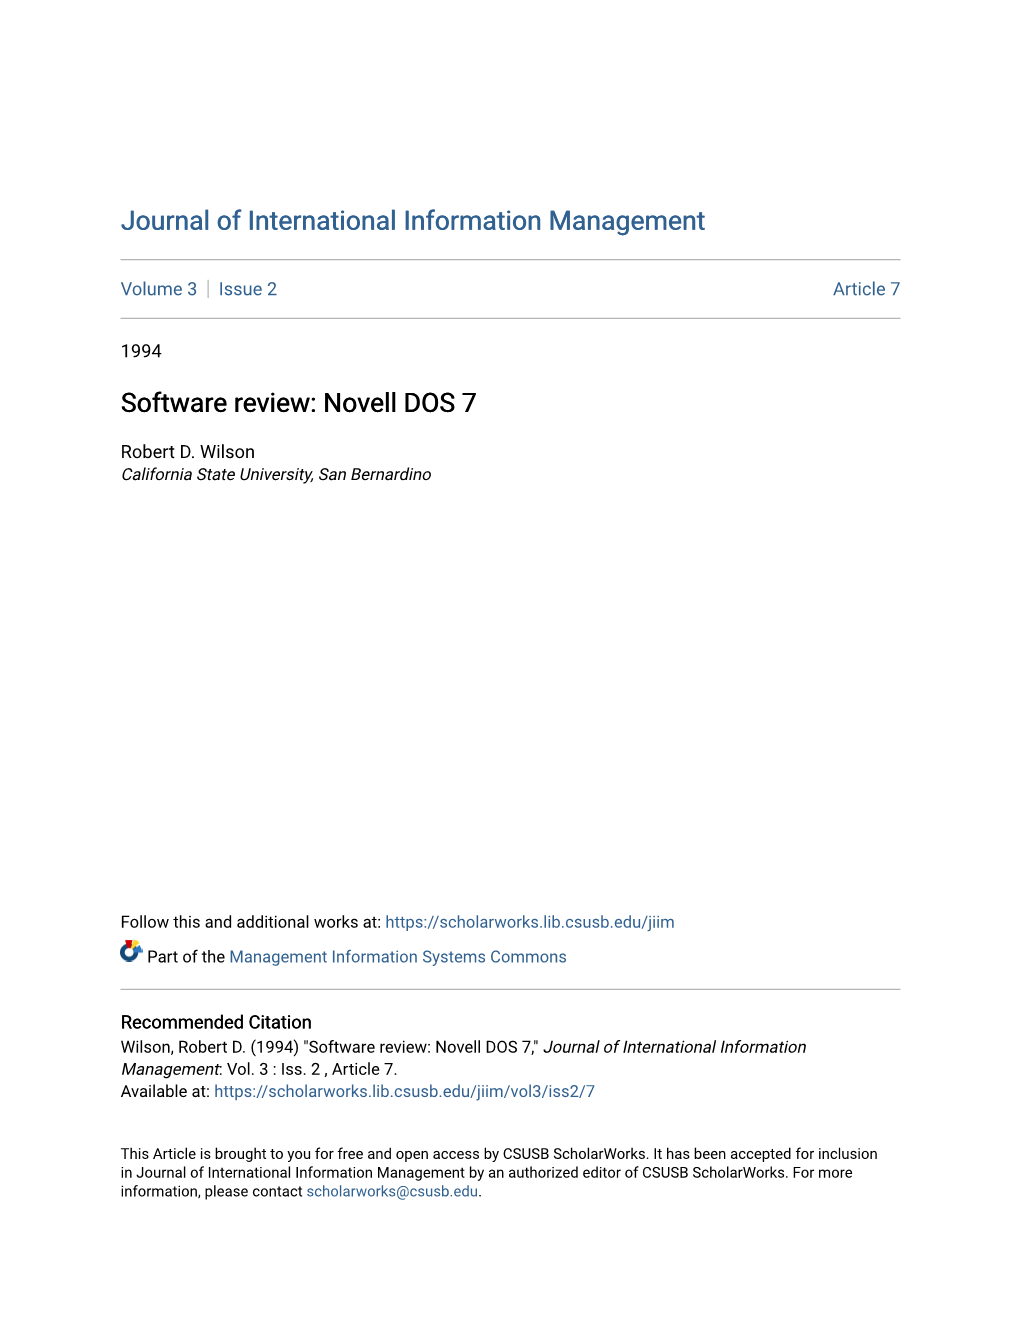 Software Review: Novell DOS 7